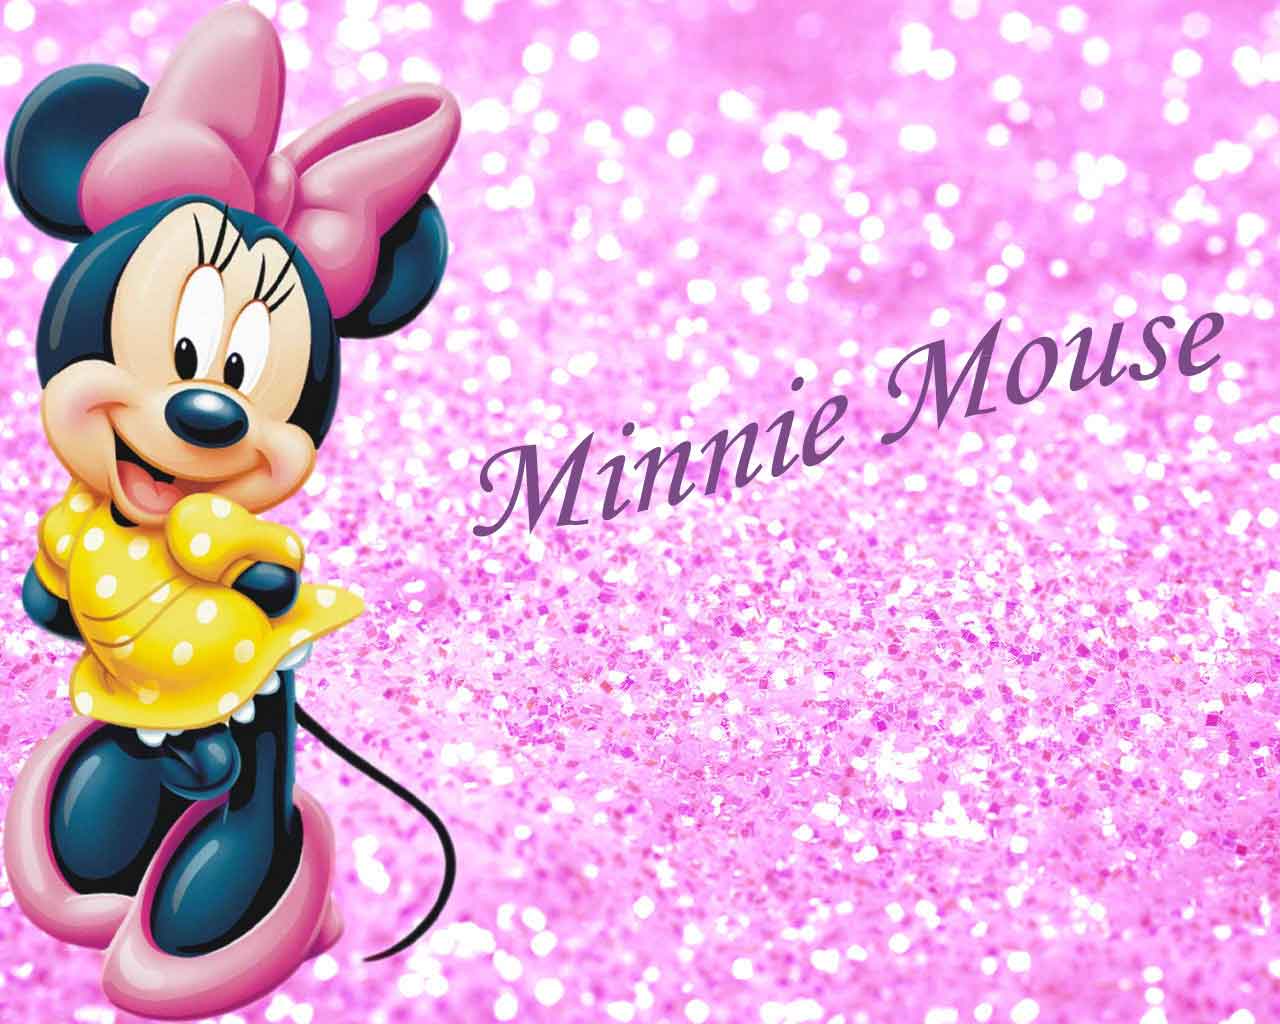 Wallpaper Minnie Mouse  Minnie mouse images Mickey mouse and friends  Minnie mouse